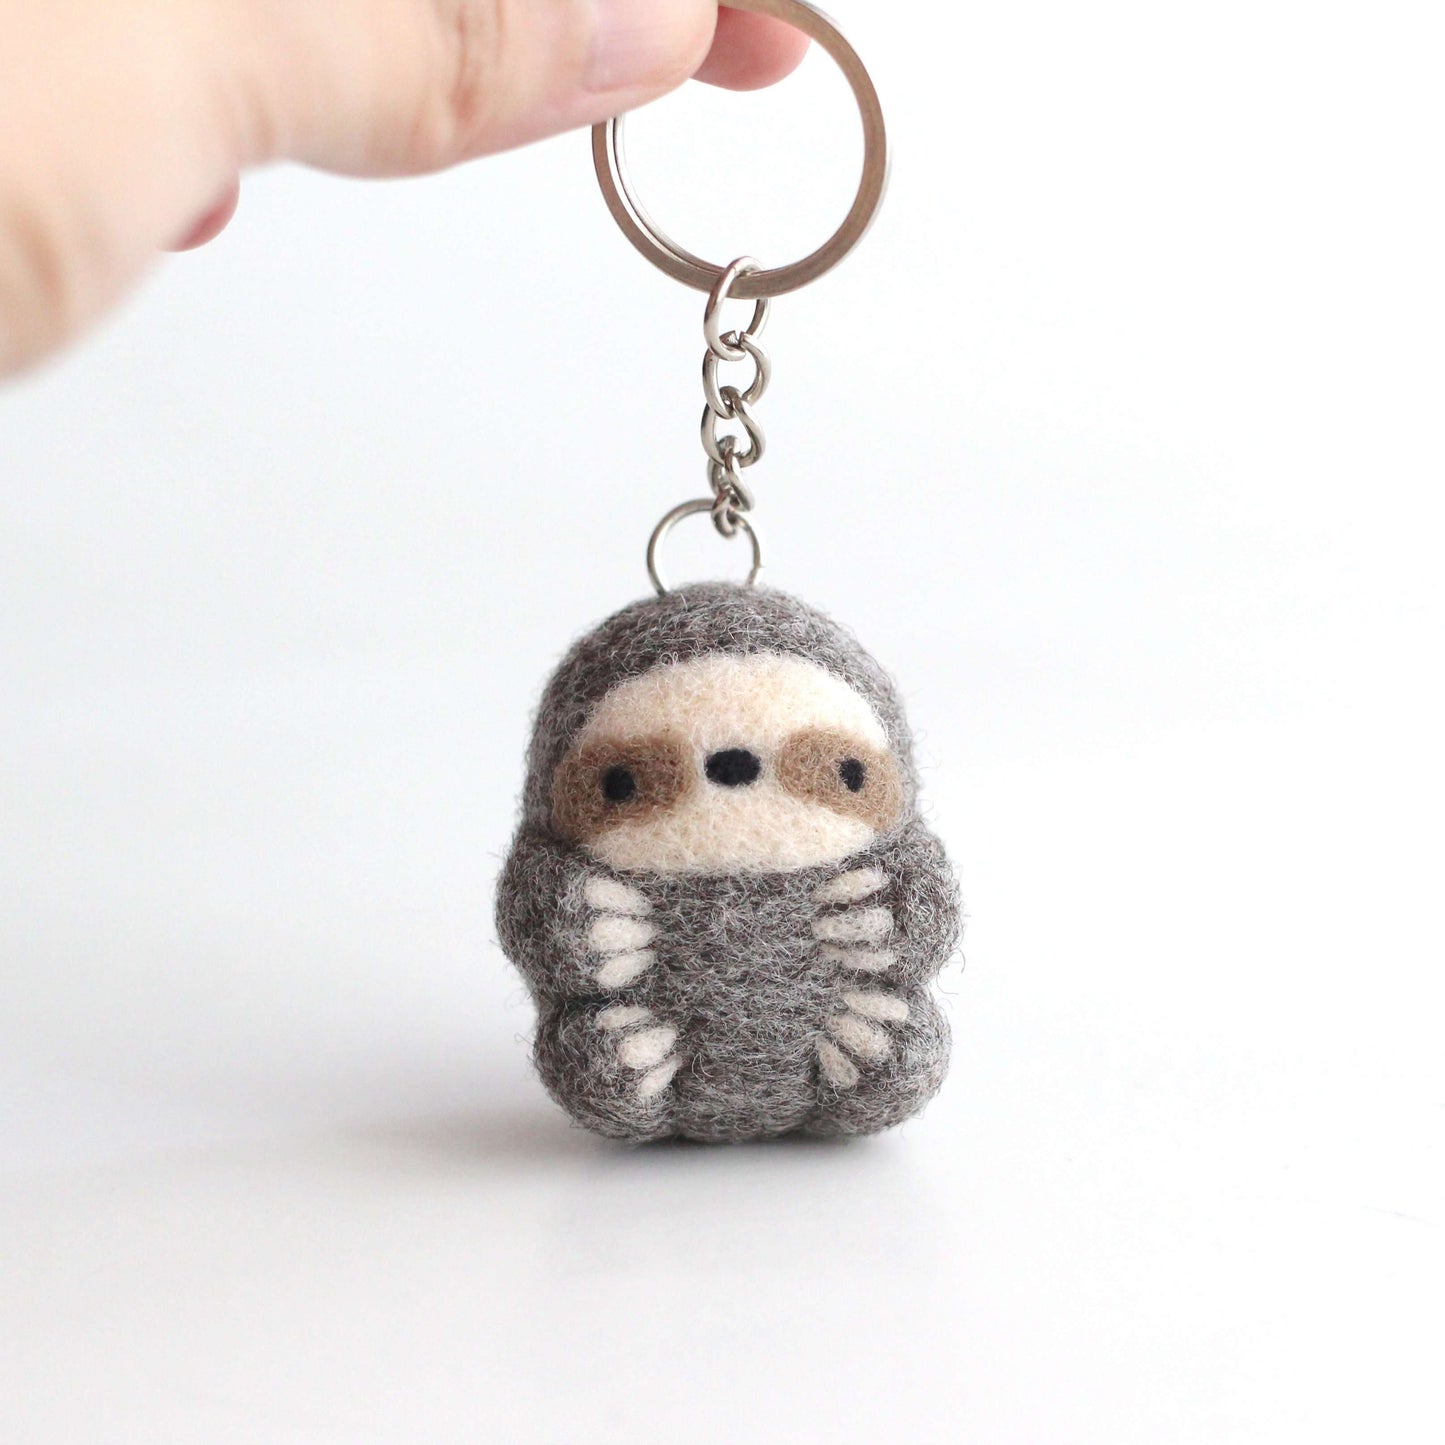 Needle Felted Sloth Keychain by Wild Whimsy Woolies